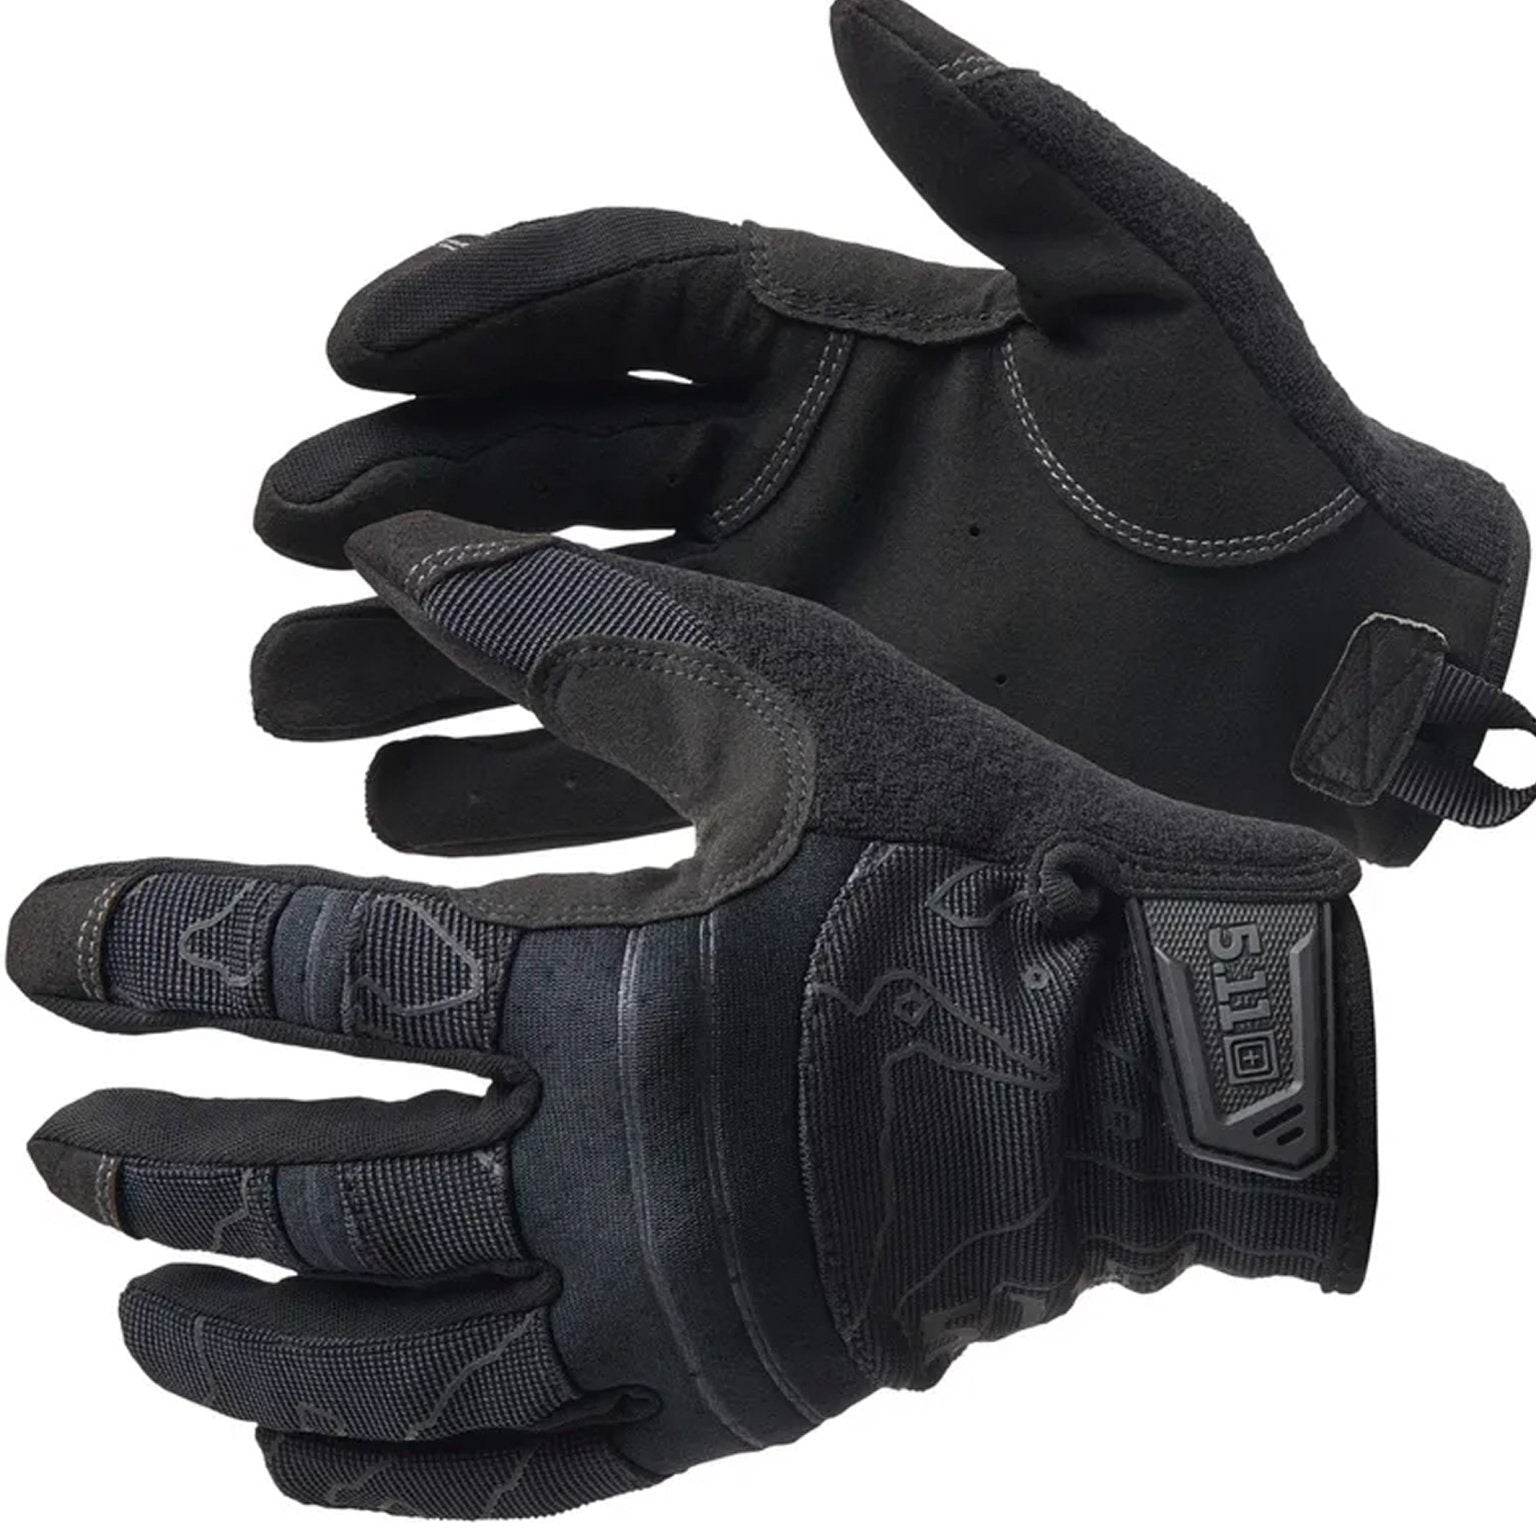 4elementsclothing5.11 Tactical5.11 Tactical - 5.11 COMPETITION SHOOTING 2.0 GLOVE - Touchscreen taper wrap gloves, Nylon EN388:2016- 3111X; EN ISO 21420 - Style 59394Gloves59394-019-S